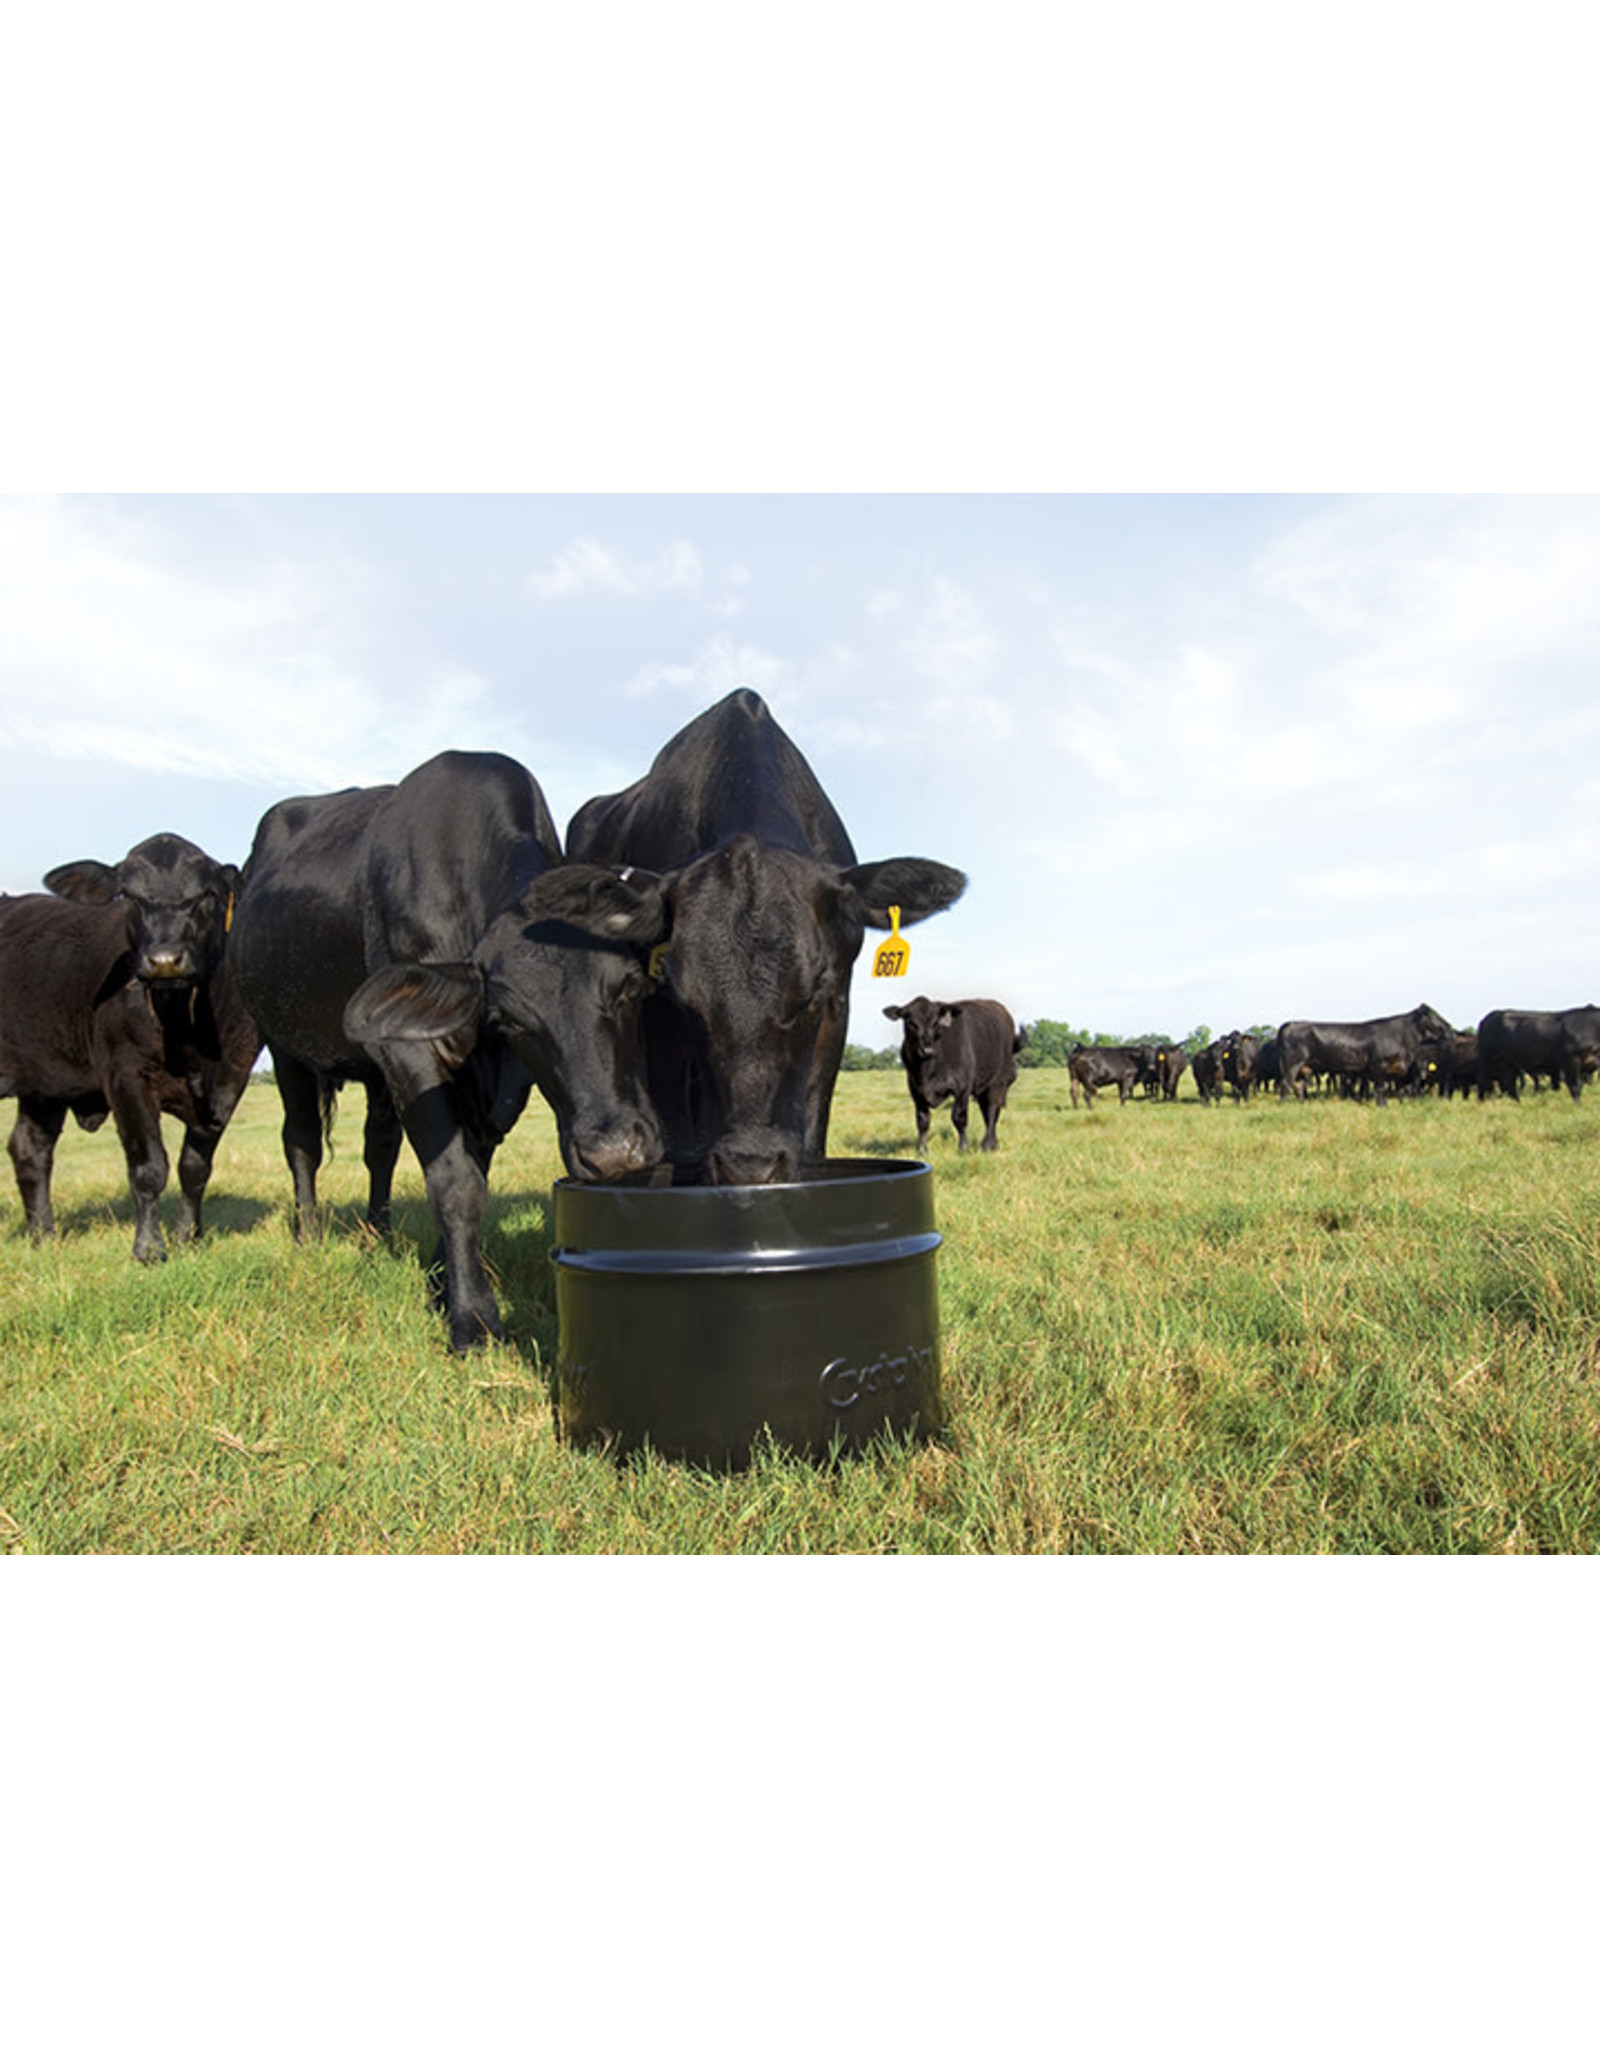 Crystalyx HE-20% - Steel 250lbs ** any season grazing moderate quality forages. 20% Protein, 3% Fat Vitamins A, D & E Calcium, Min	1.3% Phosphorus, Min 0.8% Magnesium, Min	0.3% Potassium, Min	2.0%